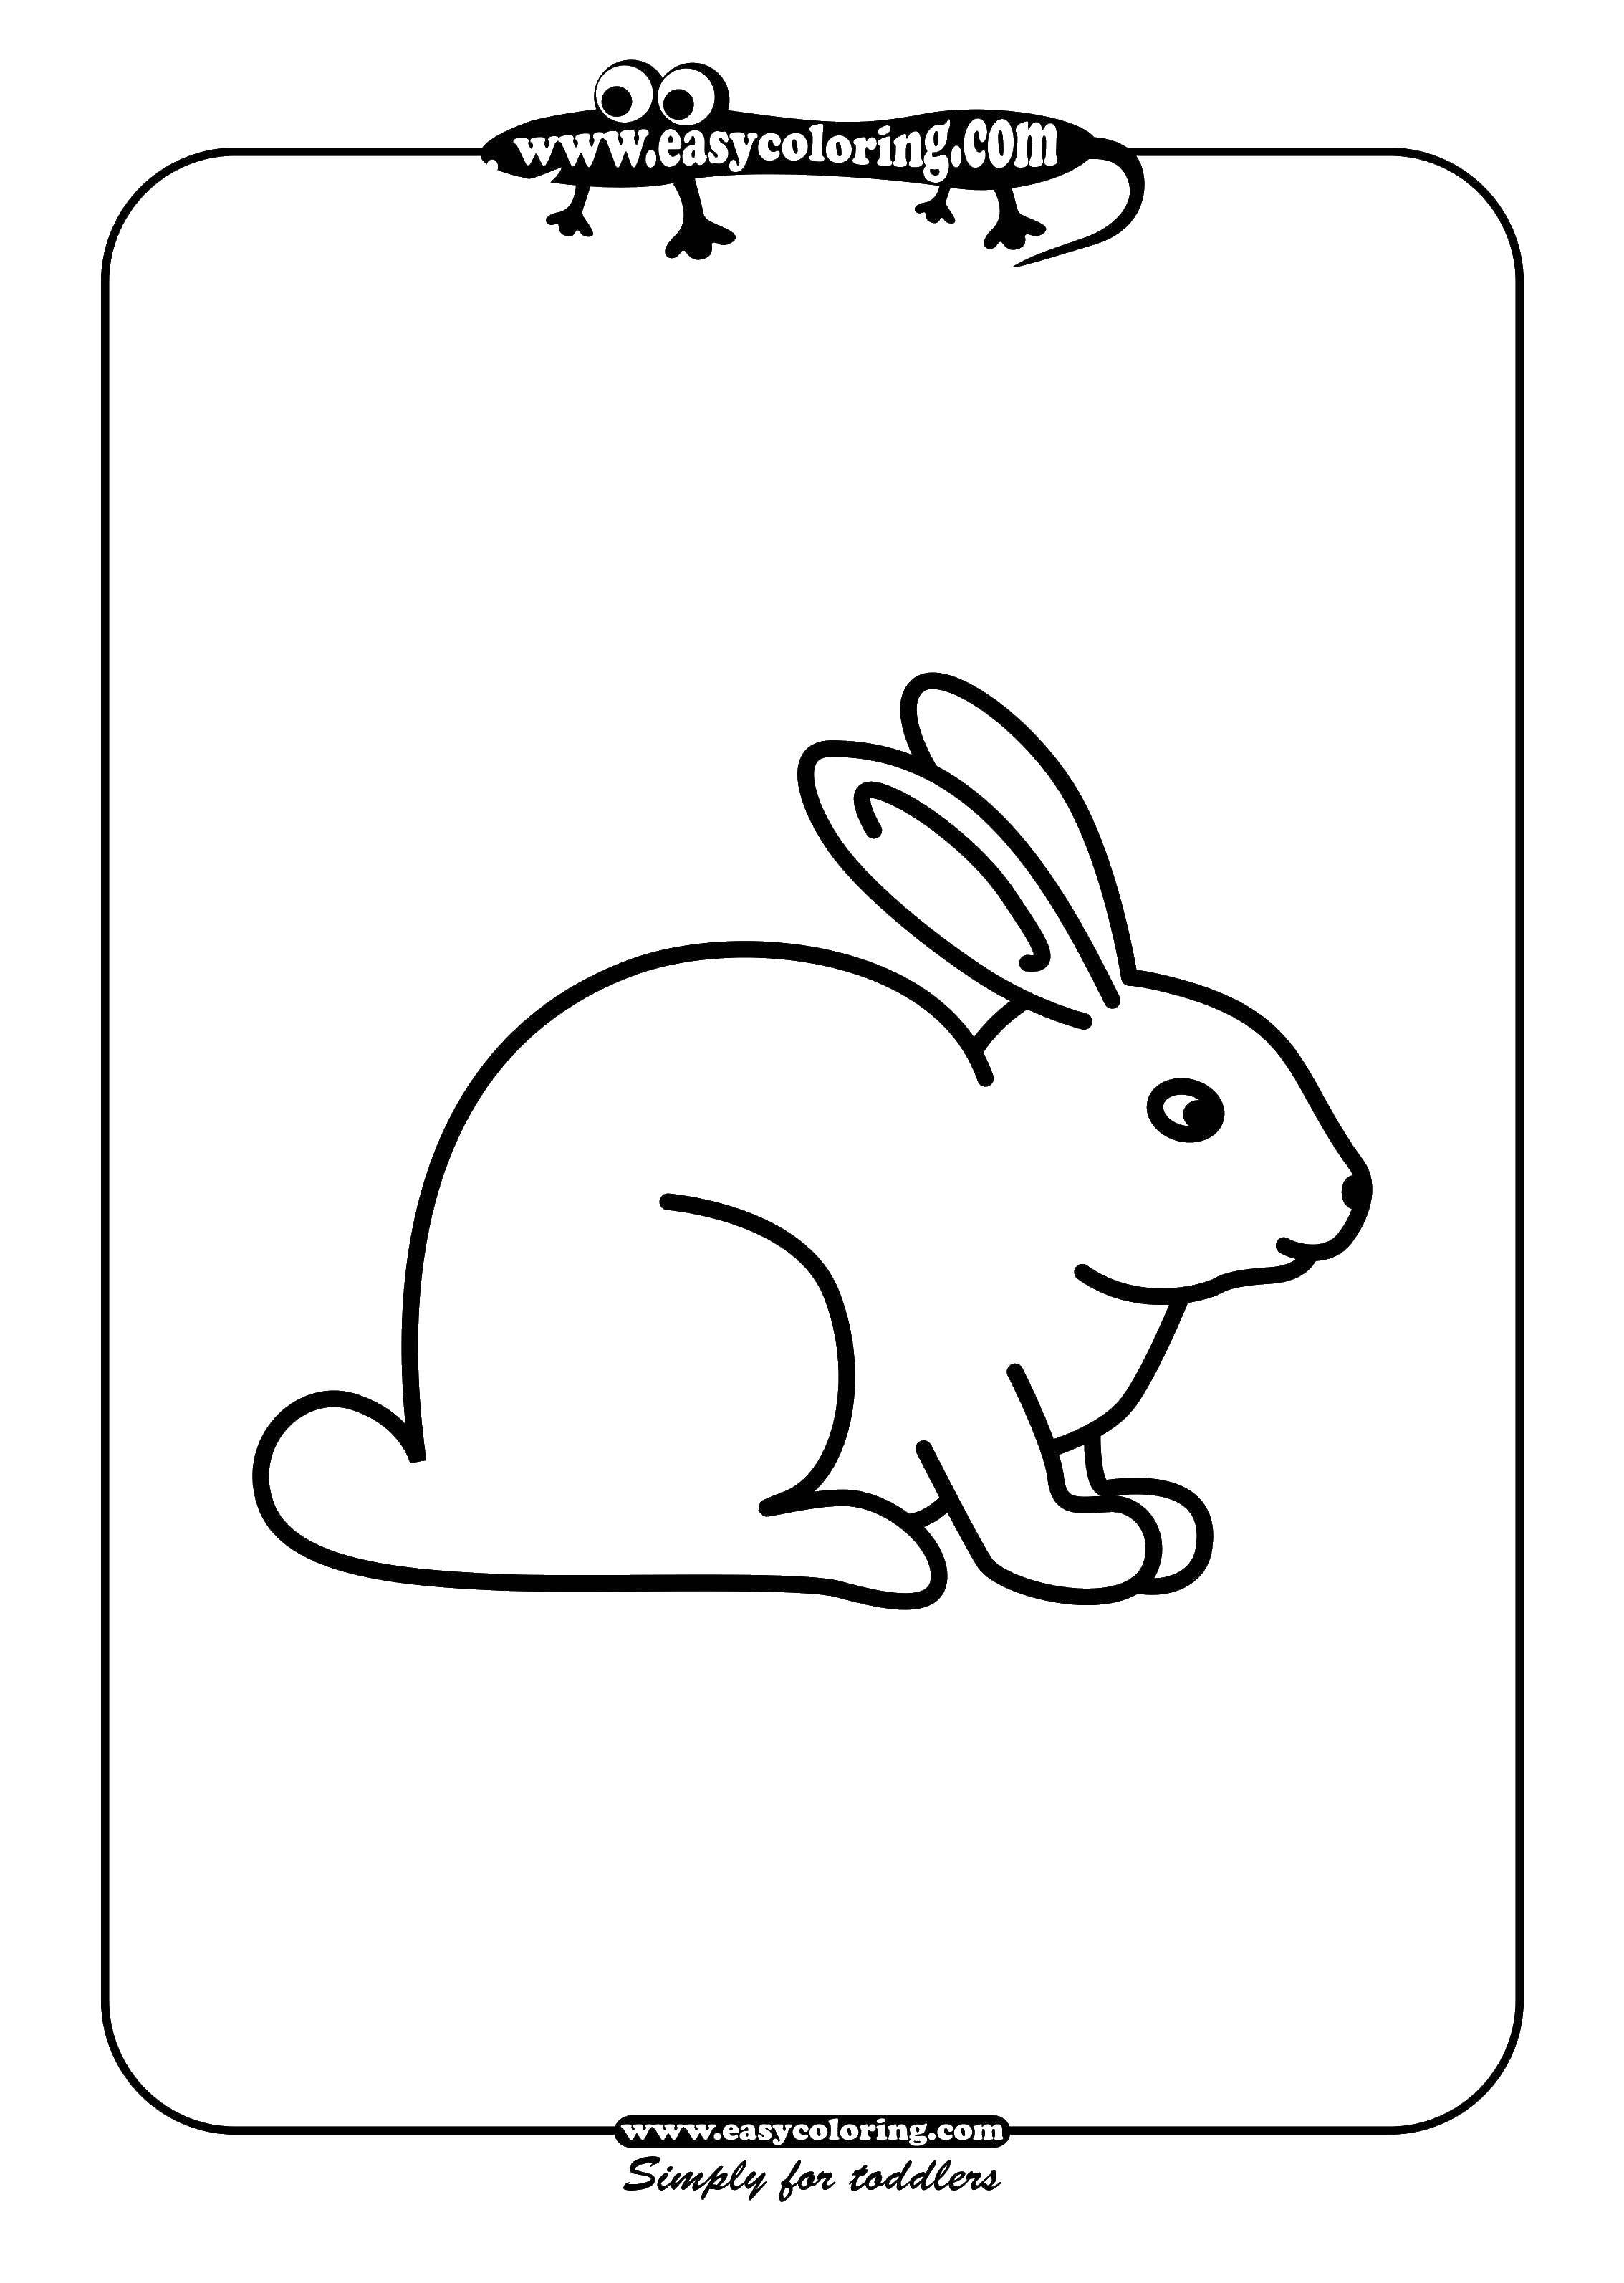 Coloring Rabbit. Category Animals. Tags:  animals, rabbit, hare.